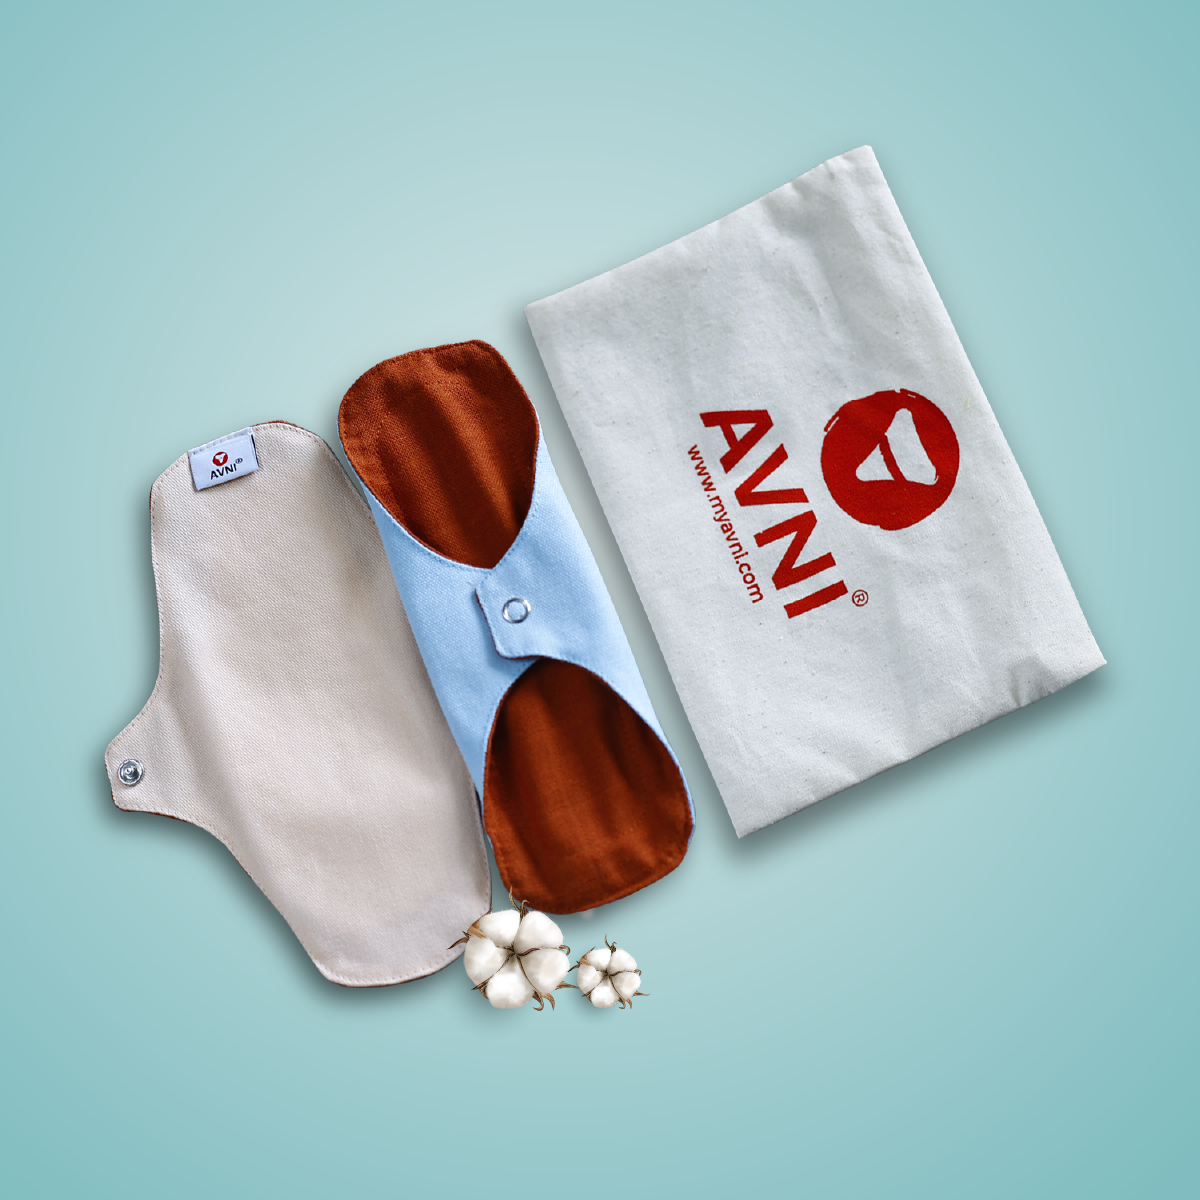 Buy Avni - Fluff Washable Cloth Panty Liner, Antimicrobial